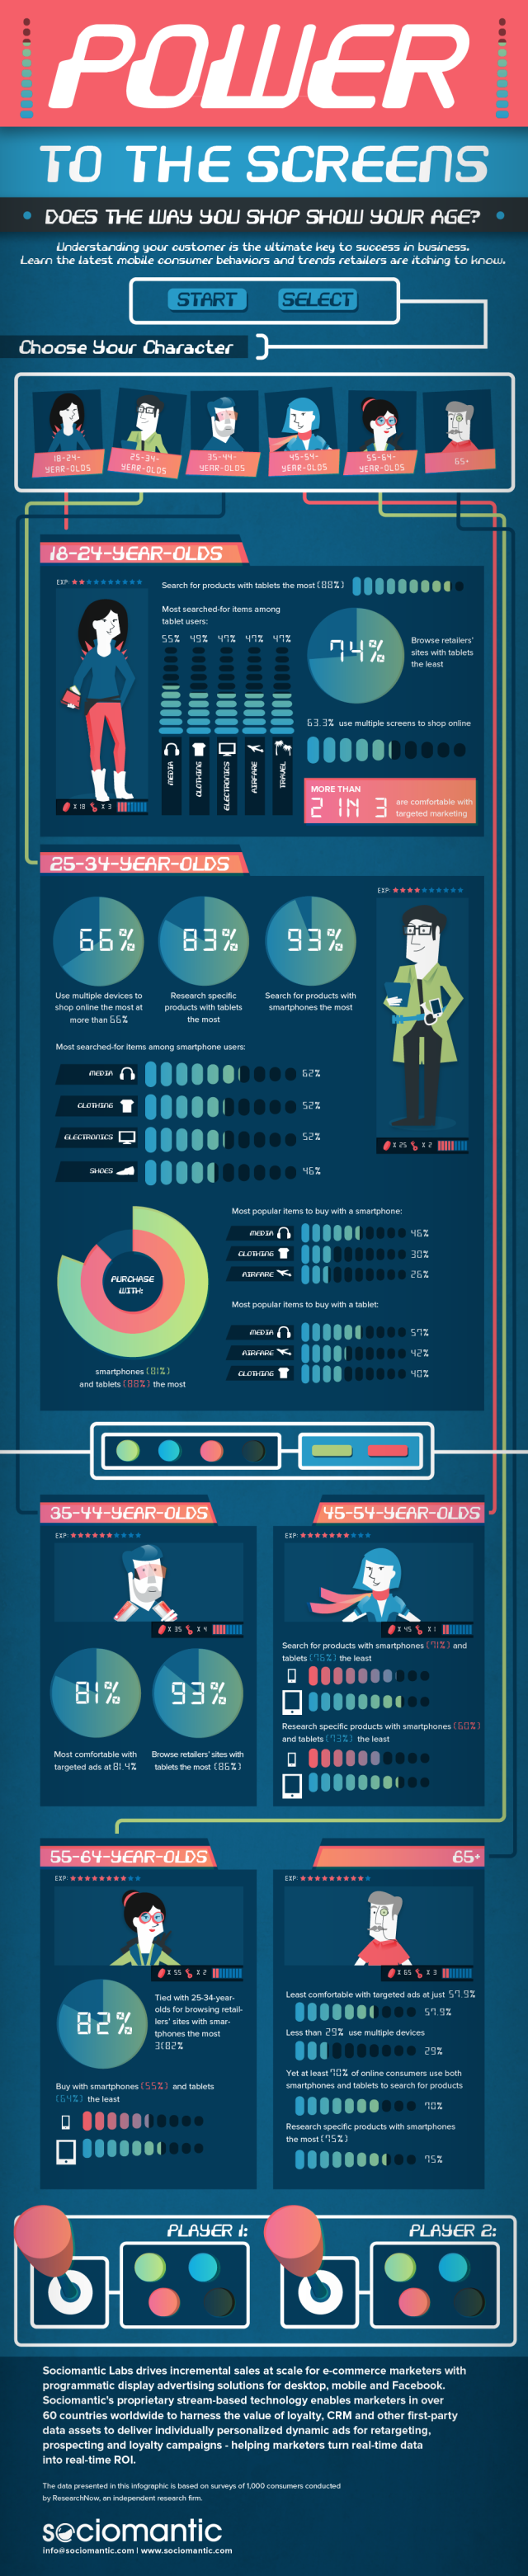 Infographie Sociomantic - Power to the Screens - 17 mars 2014